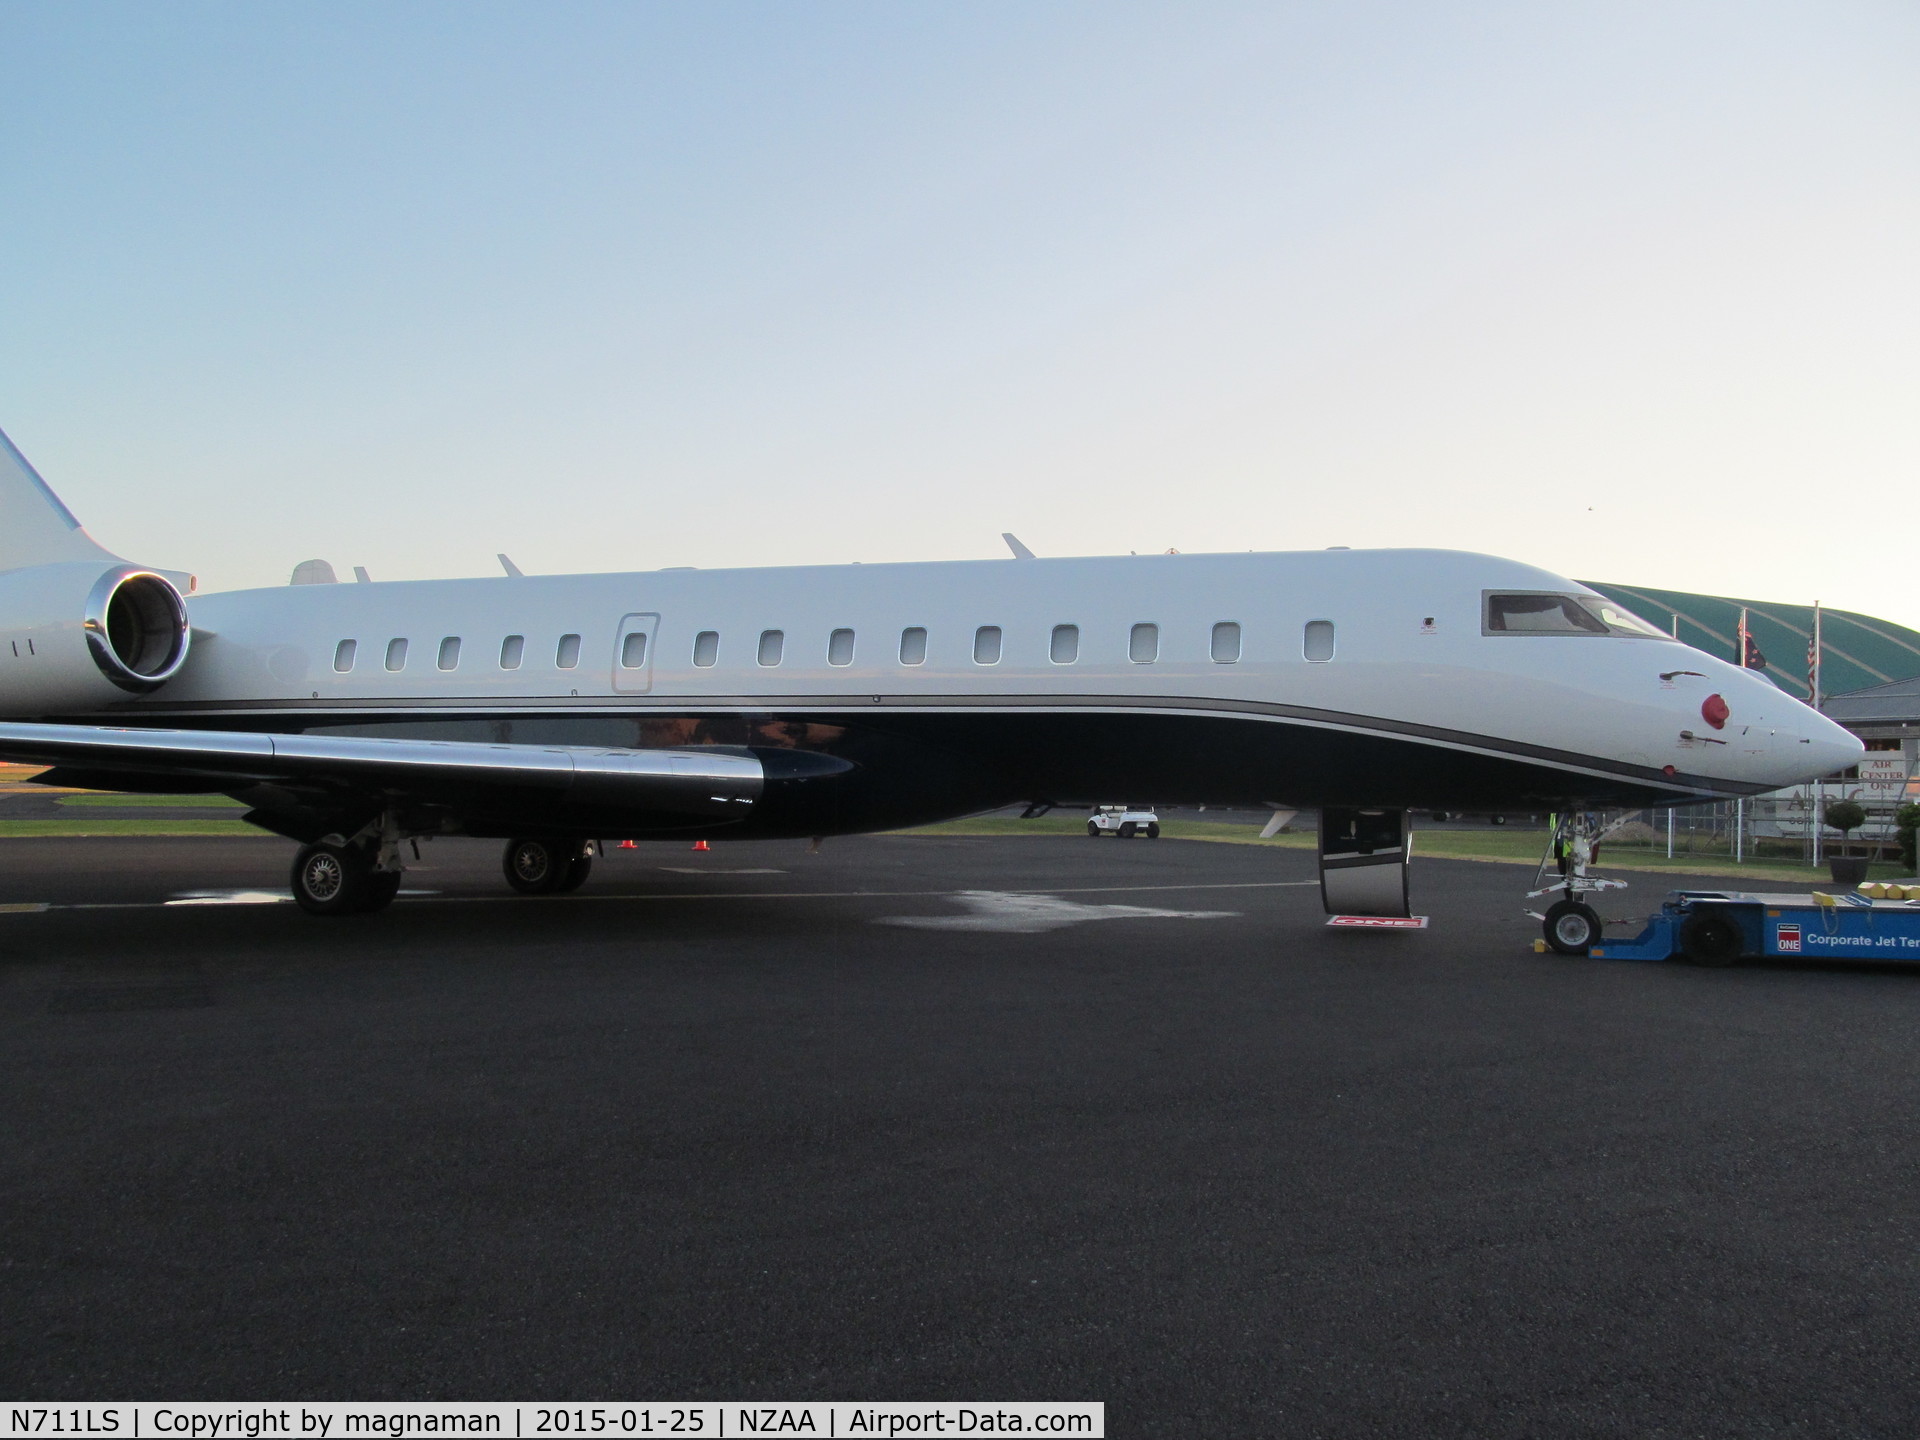 N711LS, 2012 Bombardier BD-700-1A10 Global 6000 C/N 9476, RIGHT NEXT TO FENCE - need wide angle lens